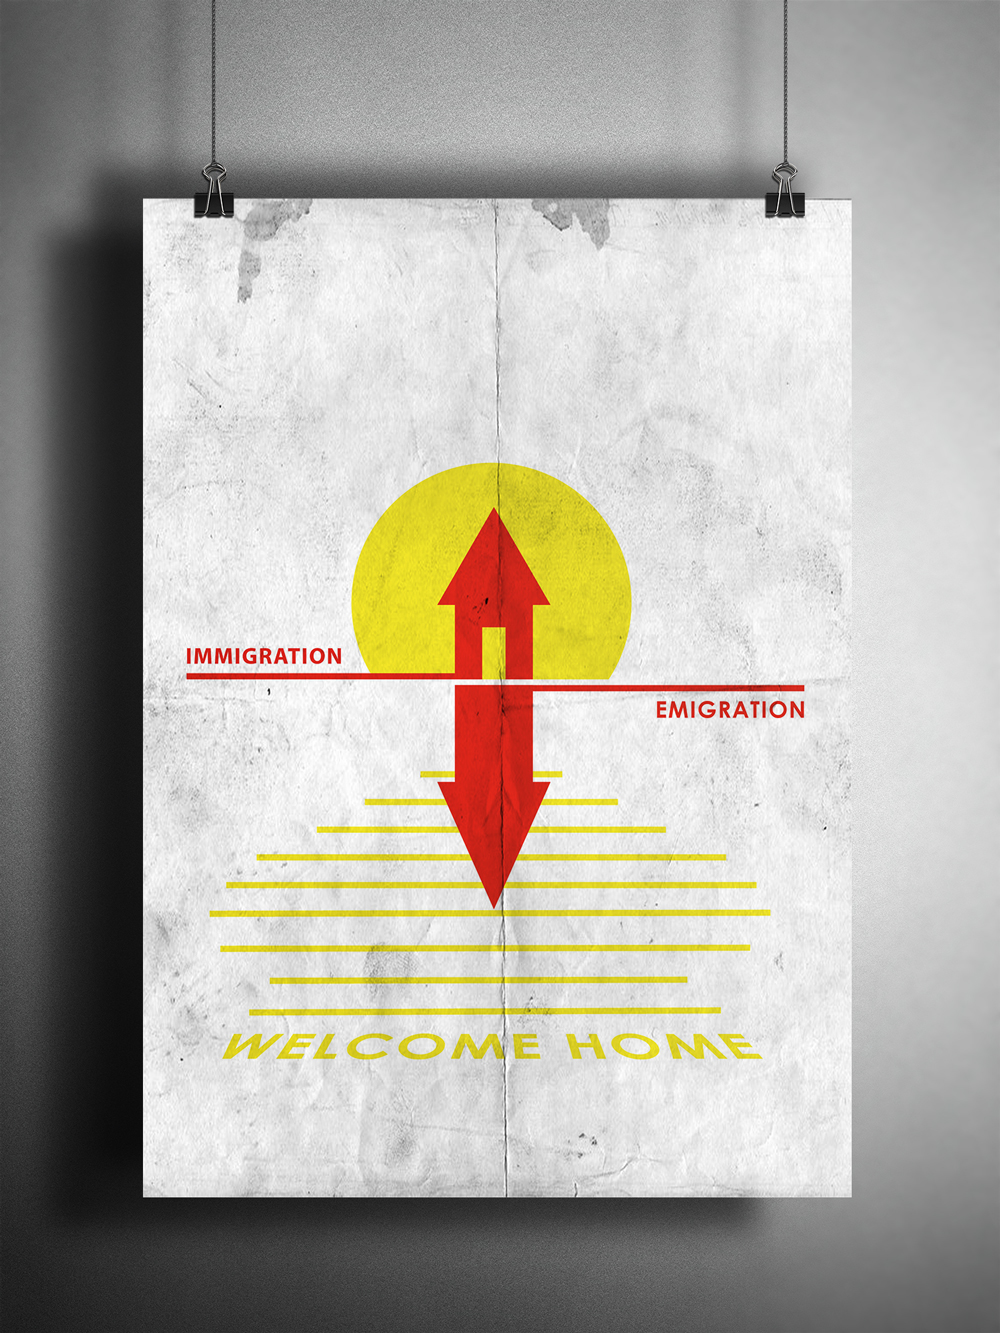 welcome home Immigration emigration poster graphic design  migrant crisis The European Migrant